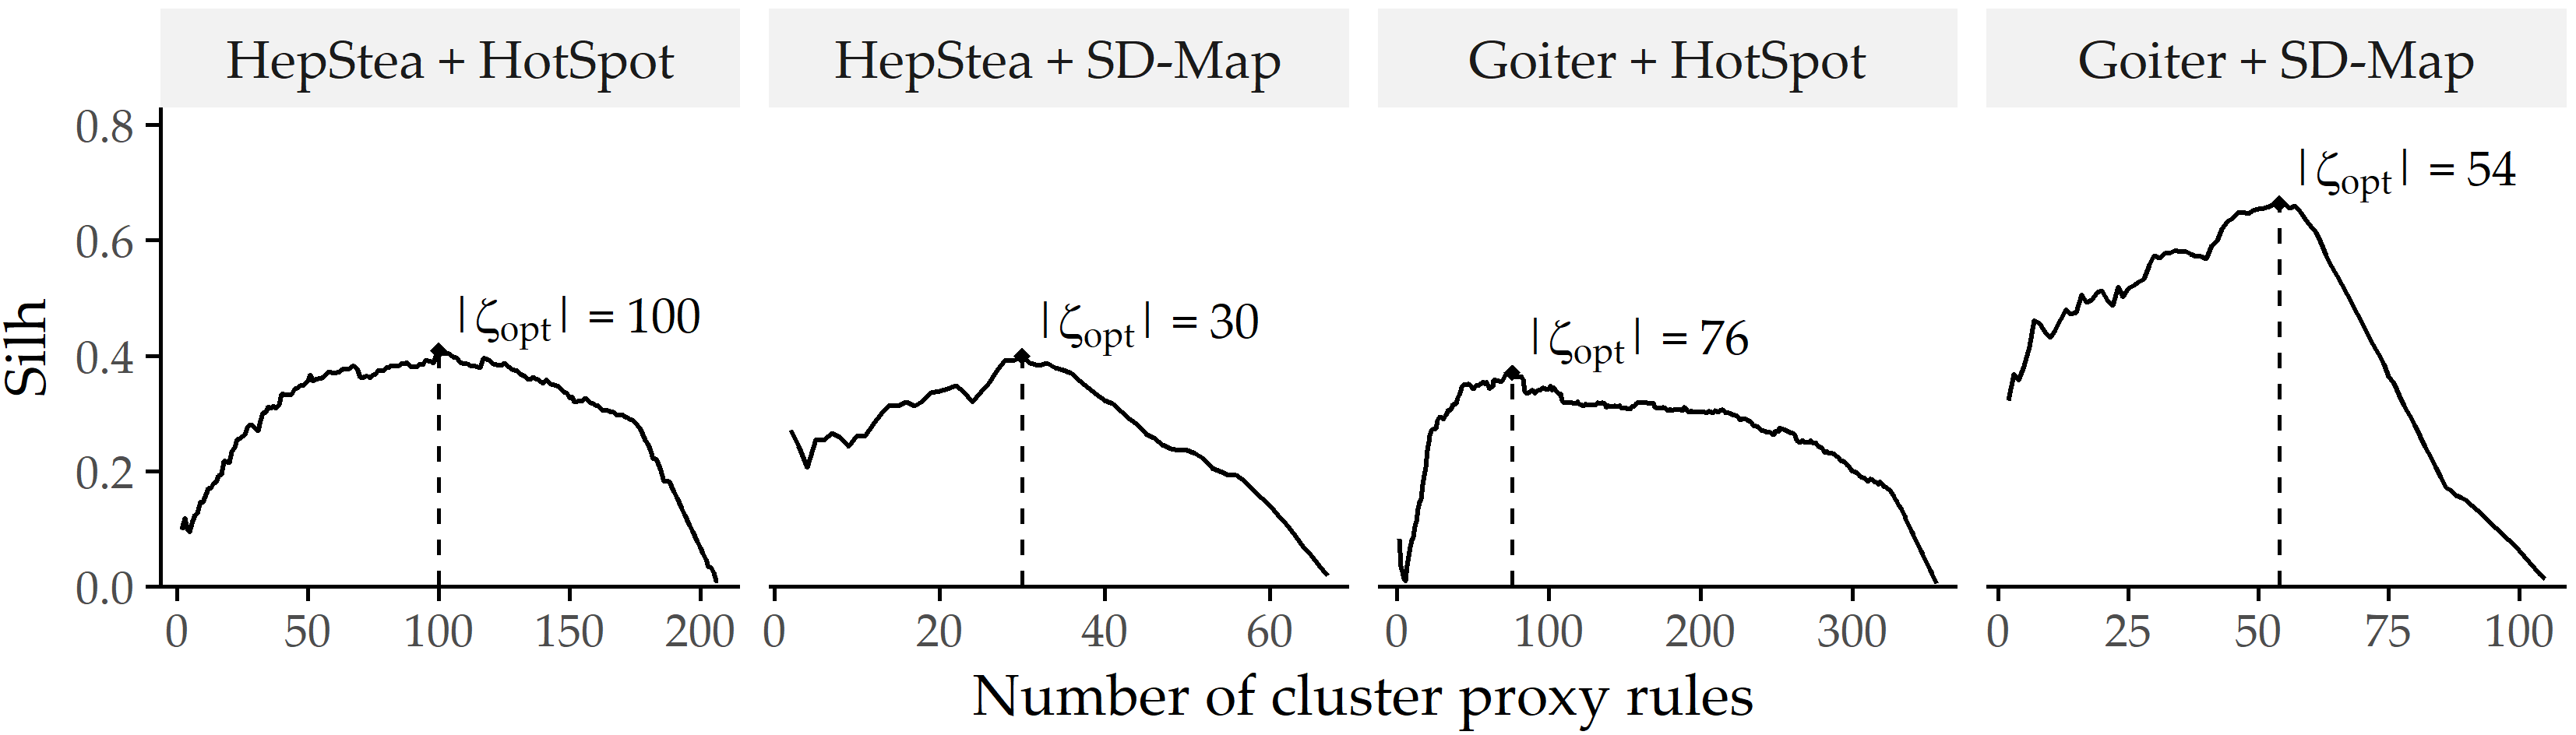 Silhouette coefficients (\(Silh\)) of SD-Clu using complete linkage for each combination of dataset and algorithm. The number of clusters \(k\) with the highest \(Silh\) score (\(|\zeta_{opt}|\)) is indicated by a dashed vertical line.